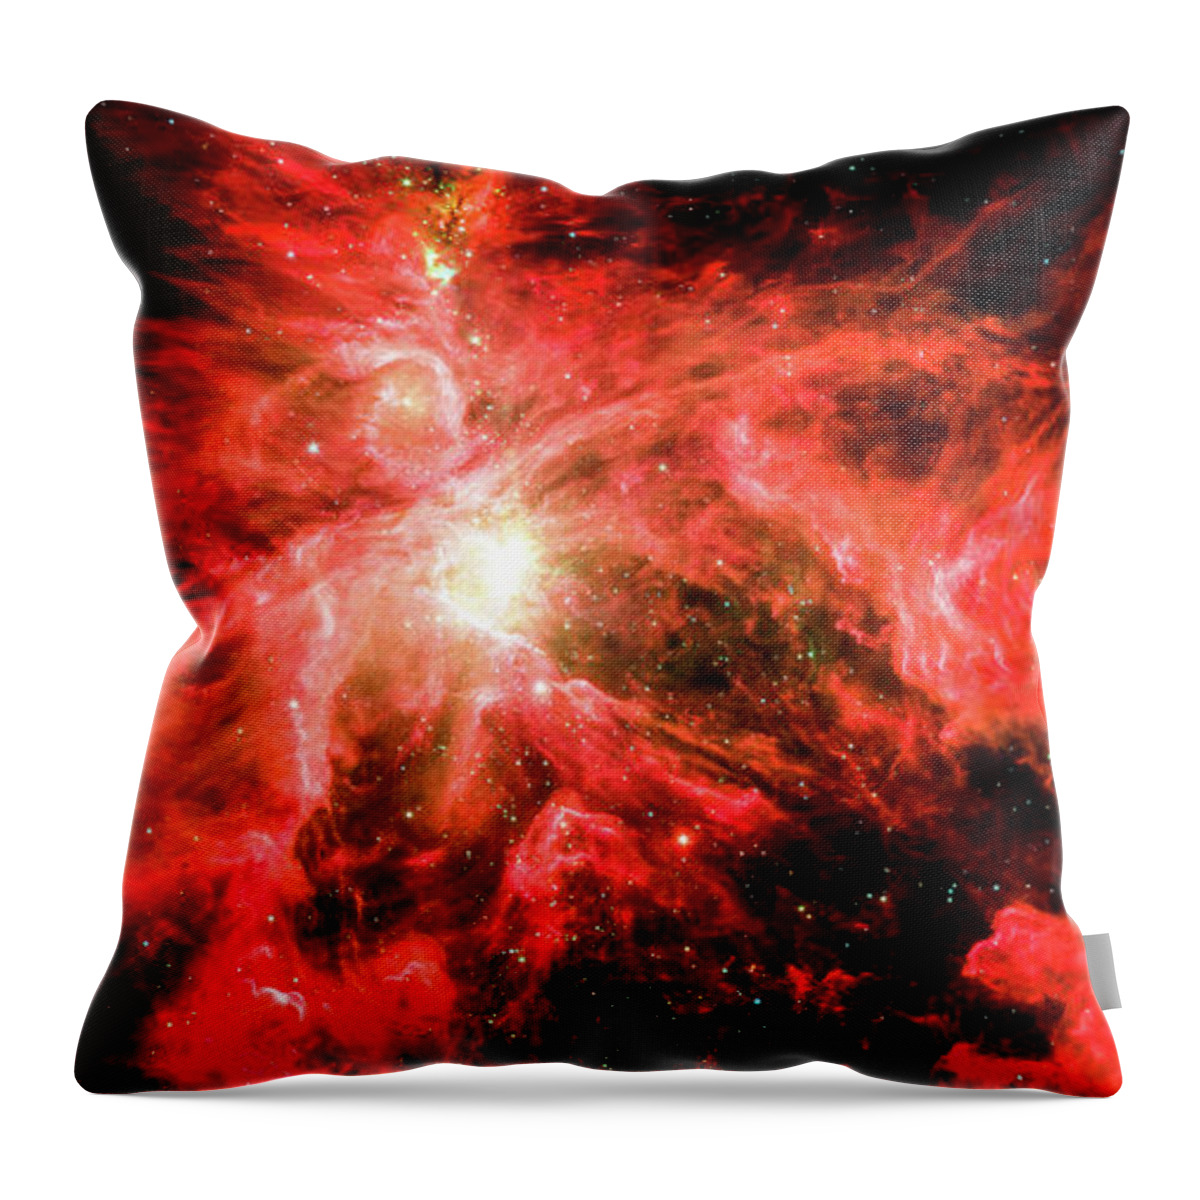 Photography Throw Pillow featuring the photograph Red Vertical Nebula by Nasa